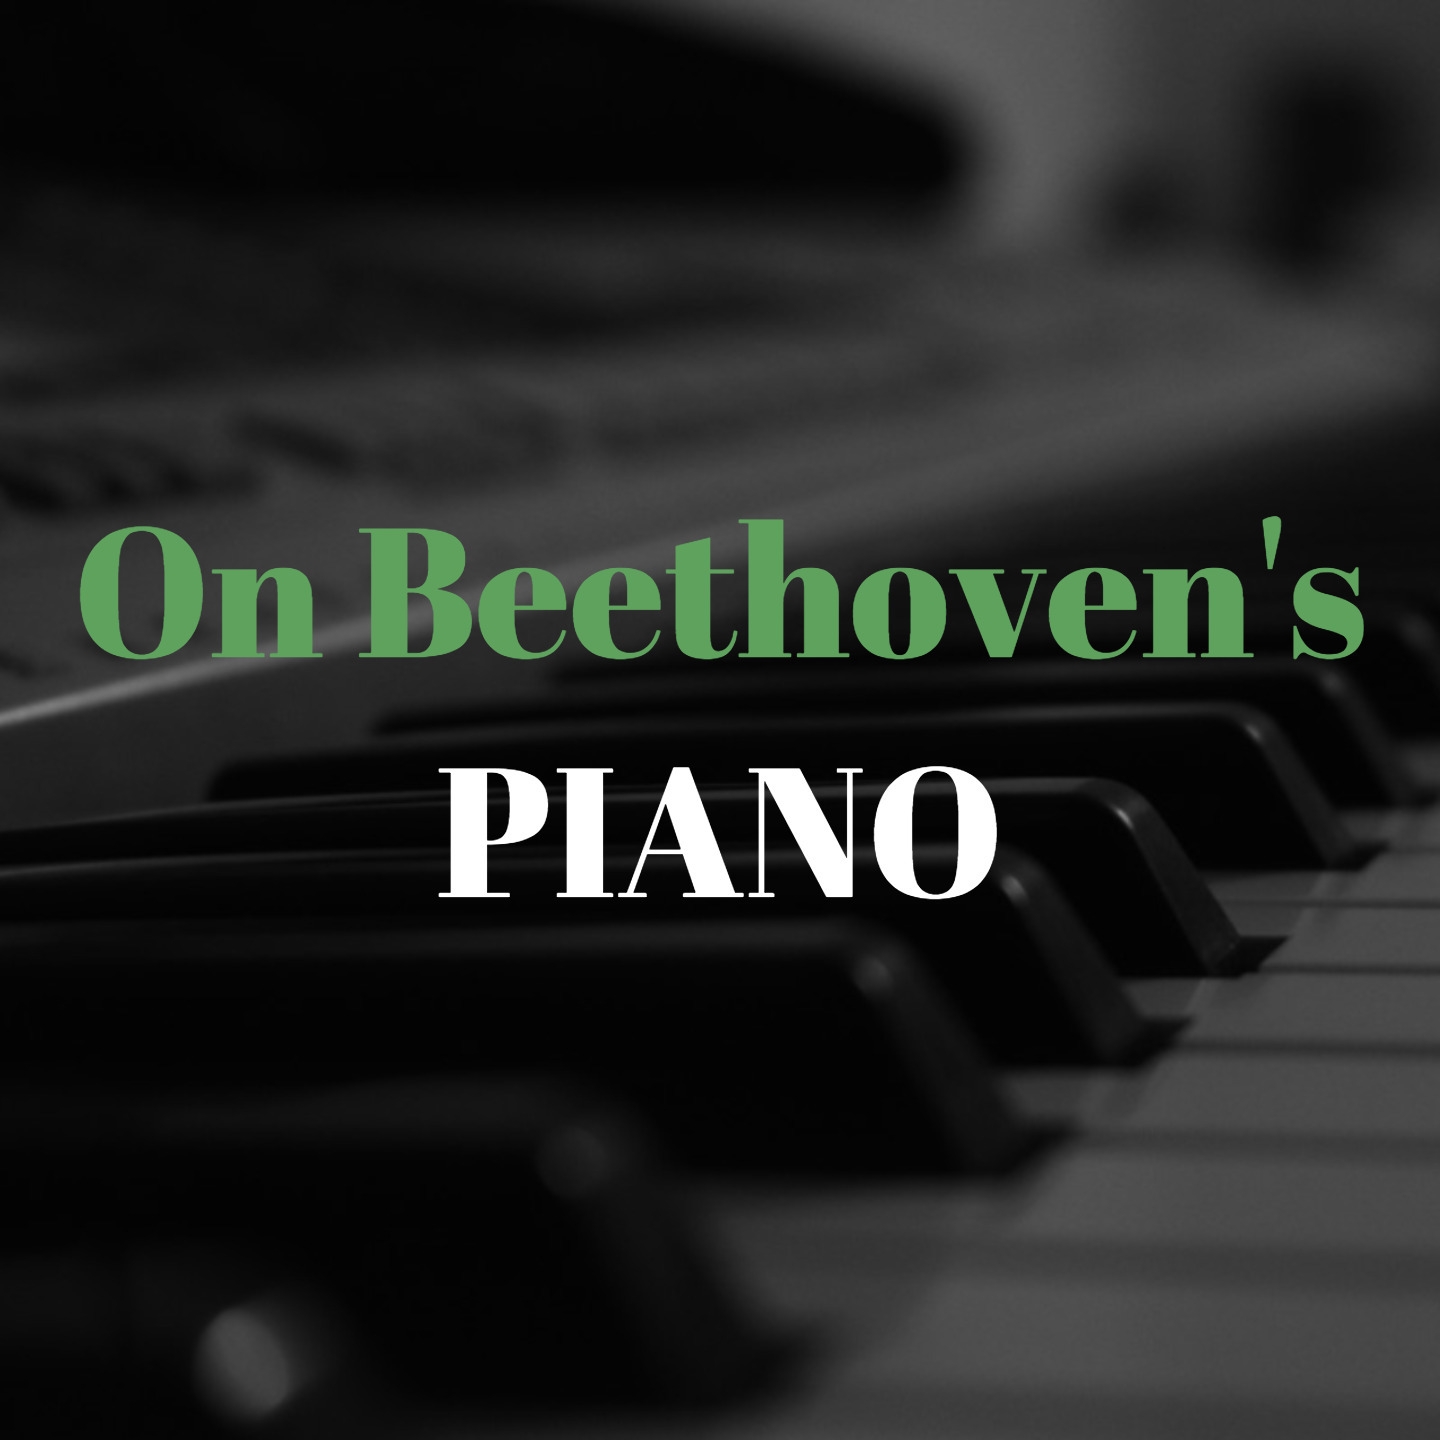 On Beethoven's Piano